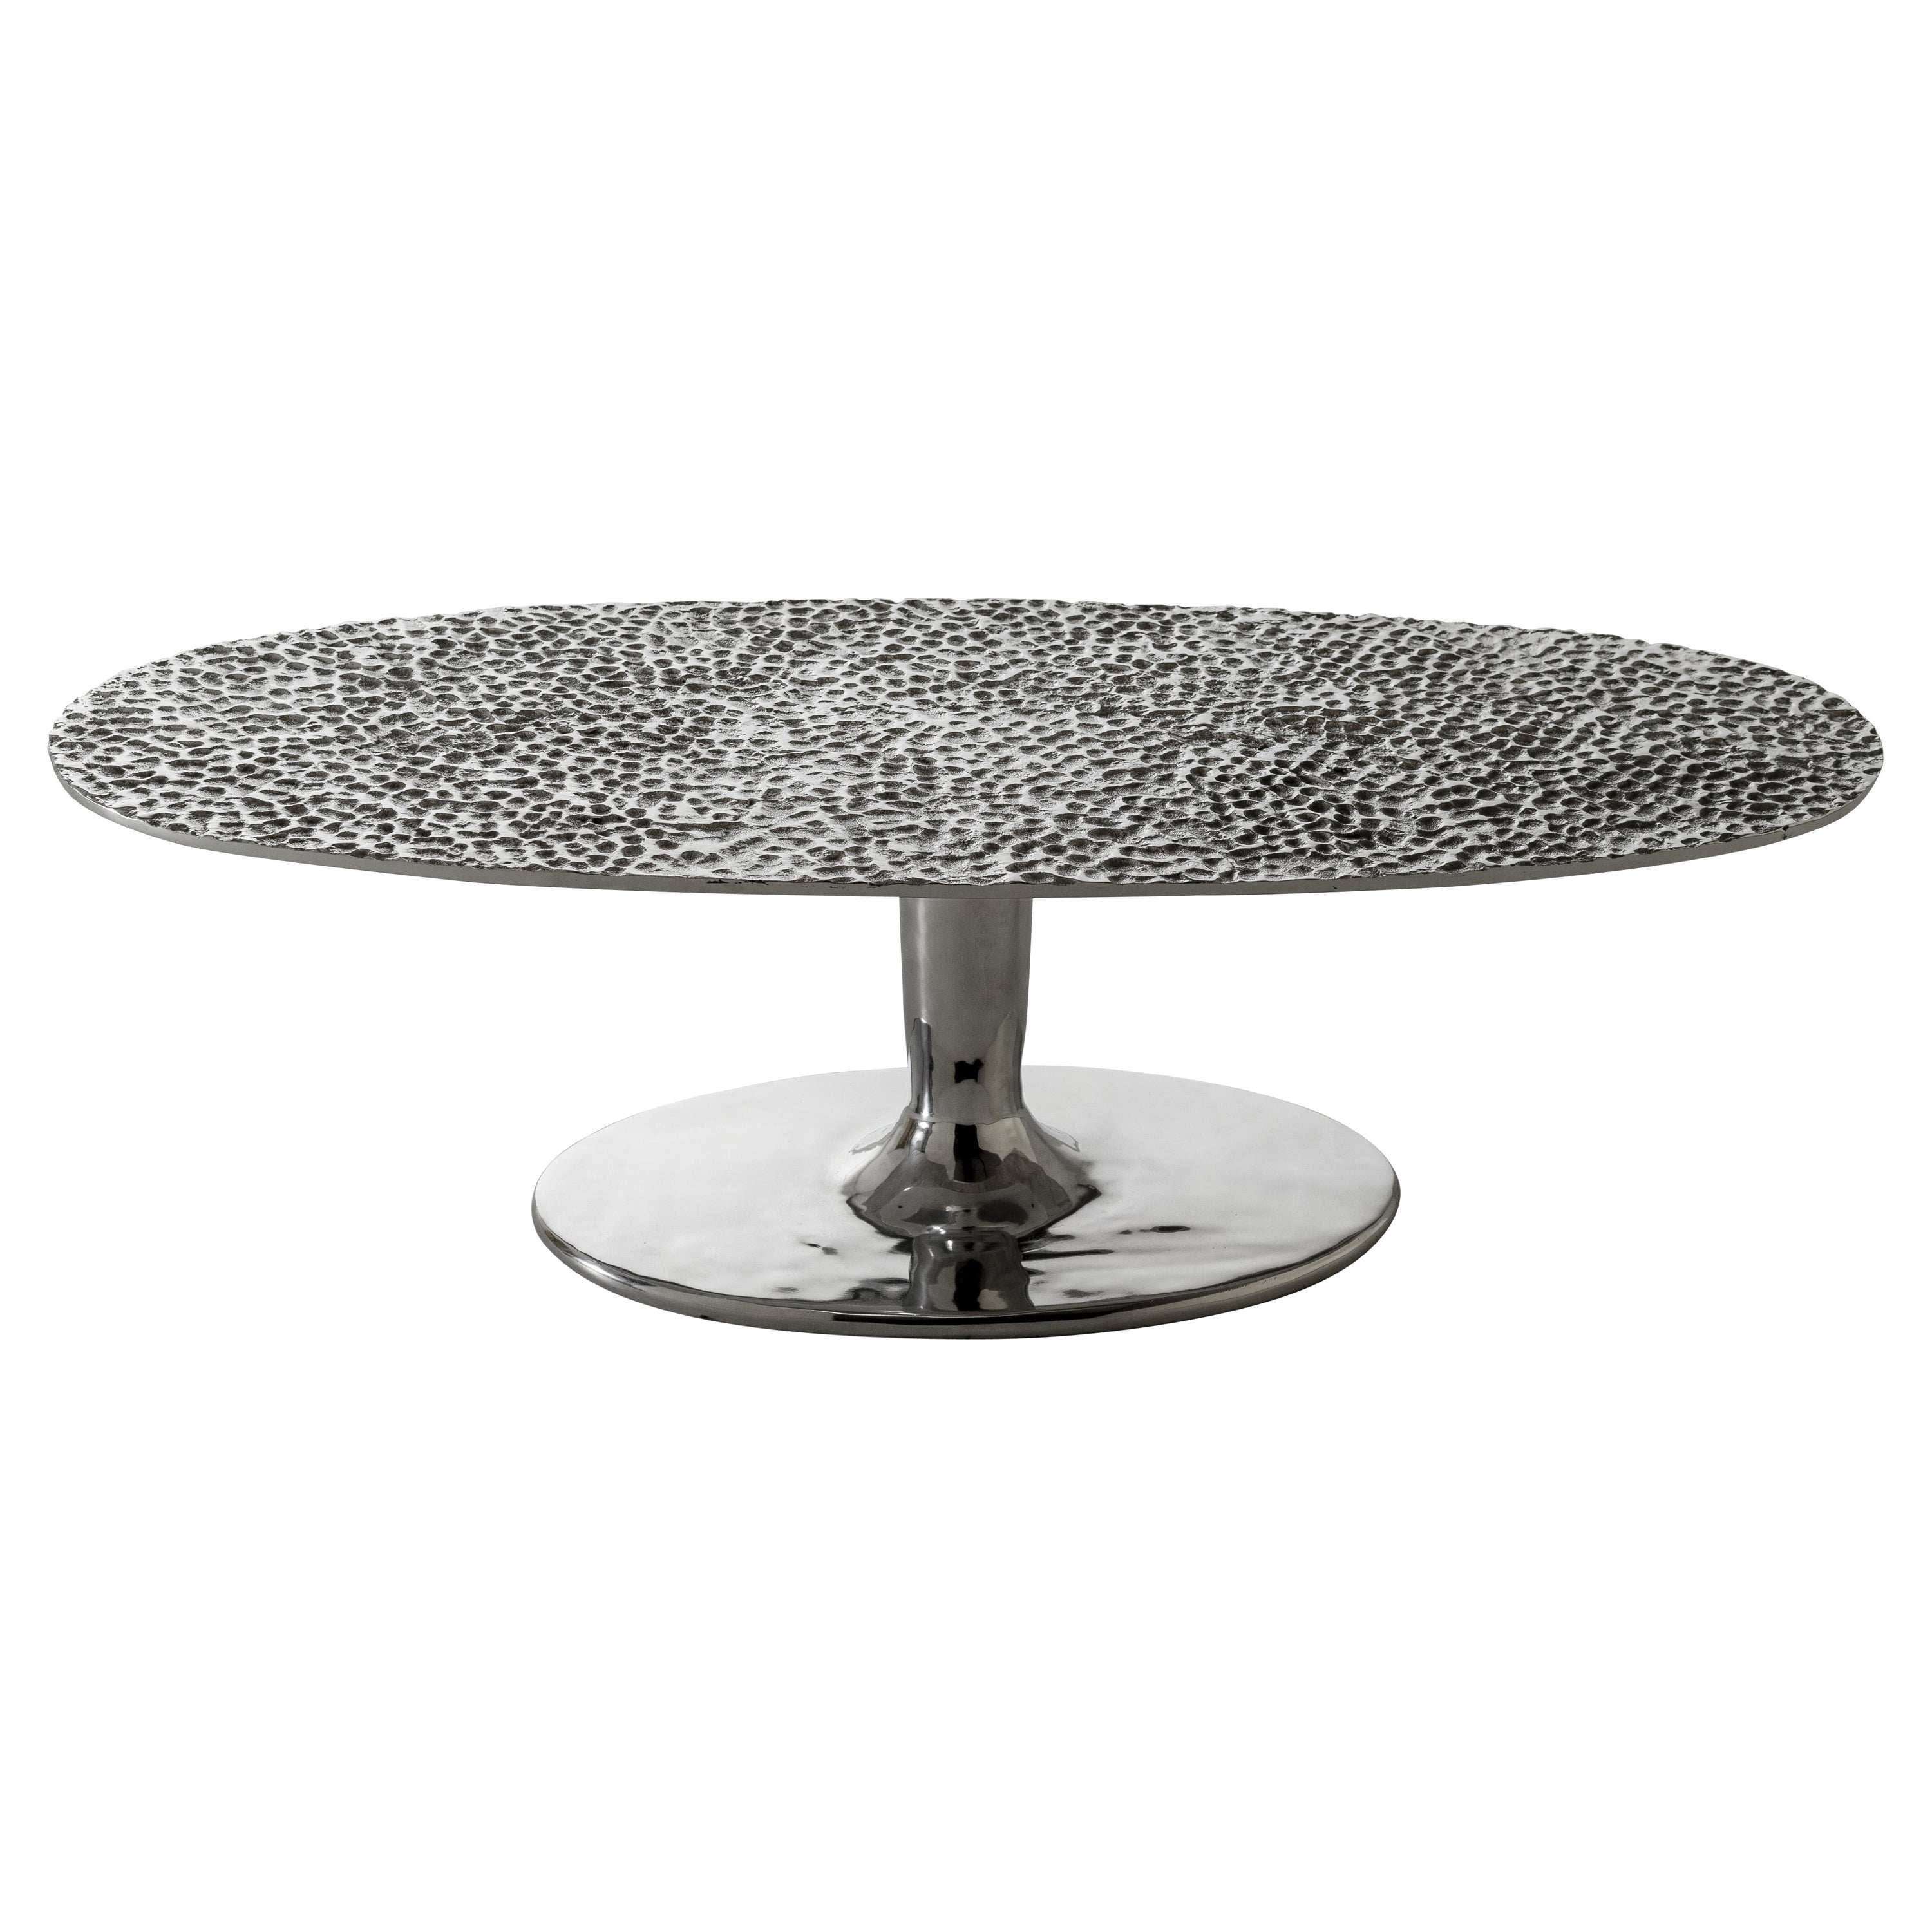 Gervasoni Next 148 Coffee Table in Cast Aluminium & Hammered Top by Paola Navone For Sale